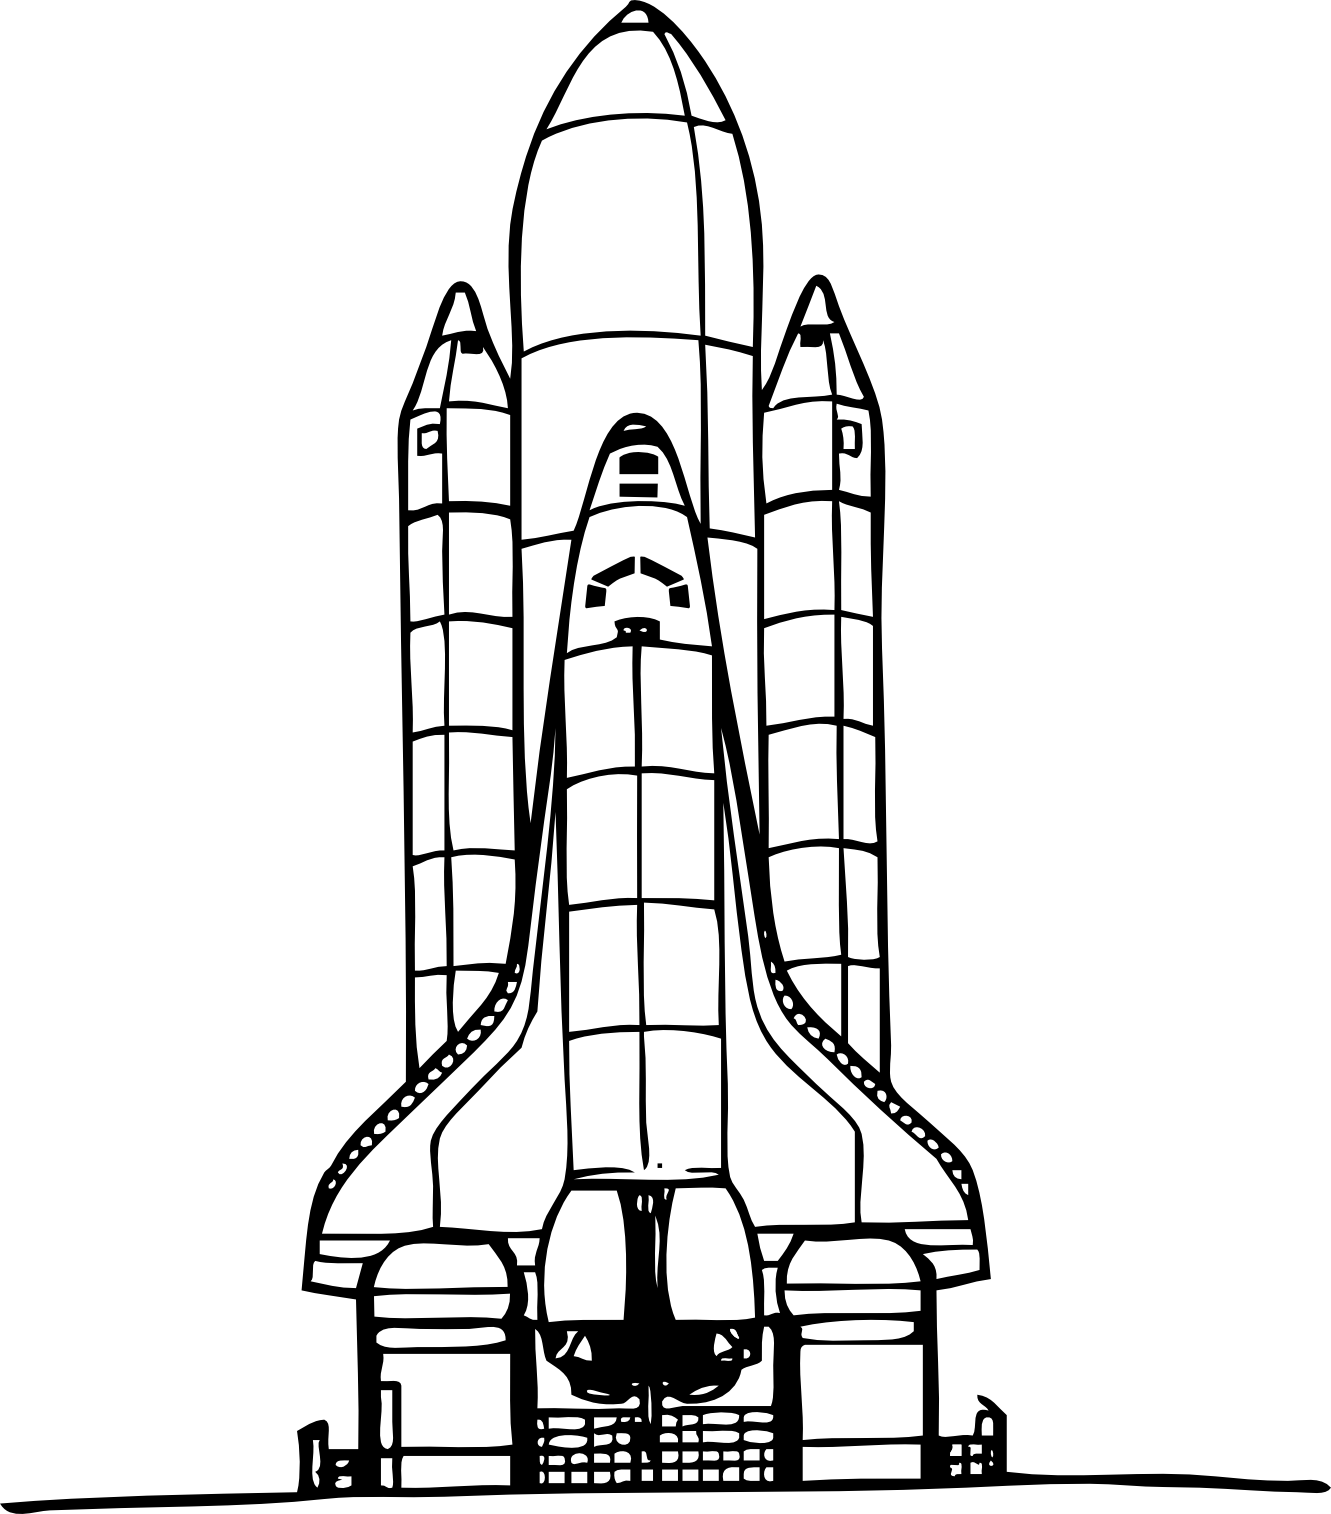 Spaceship clipart missile launch. Space shuttle coloring pages